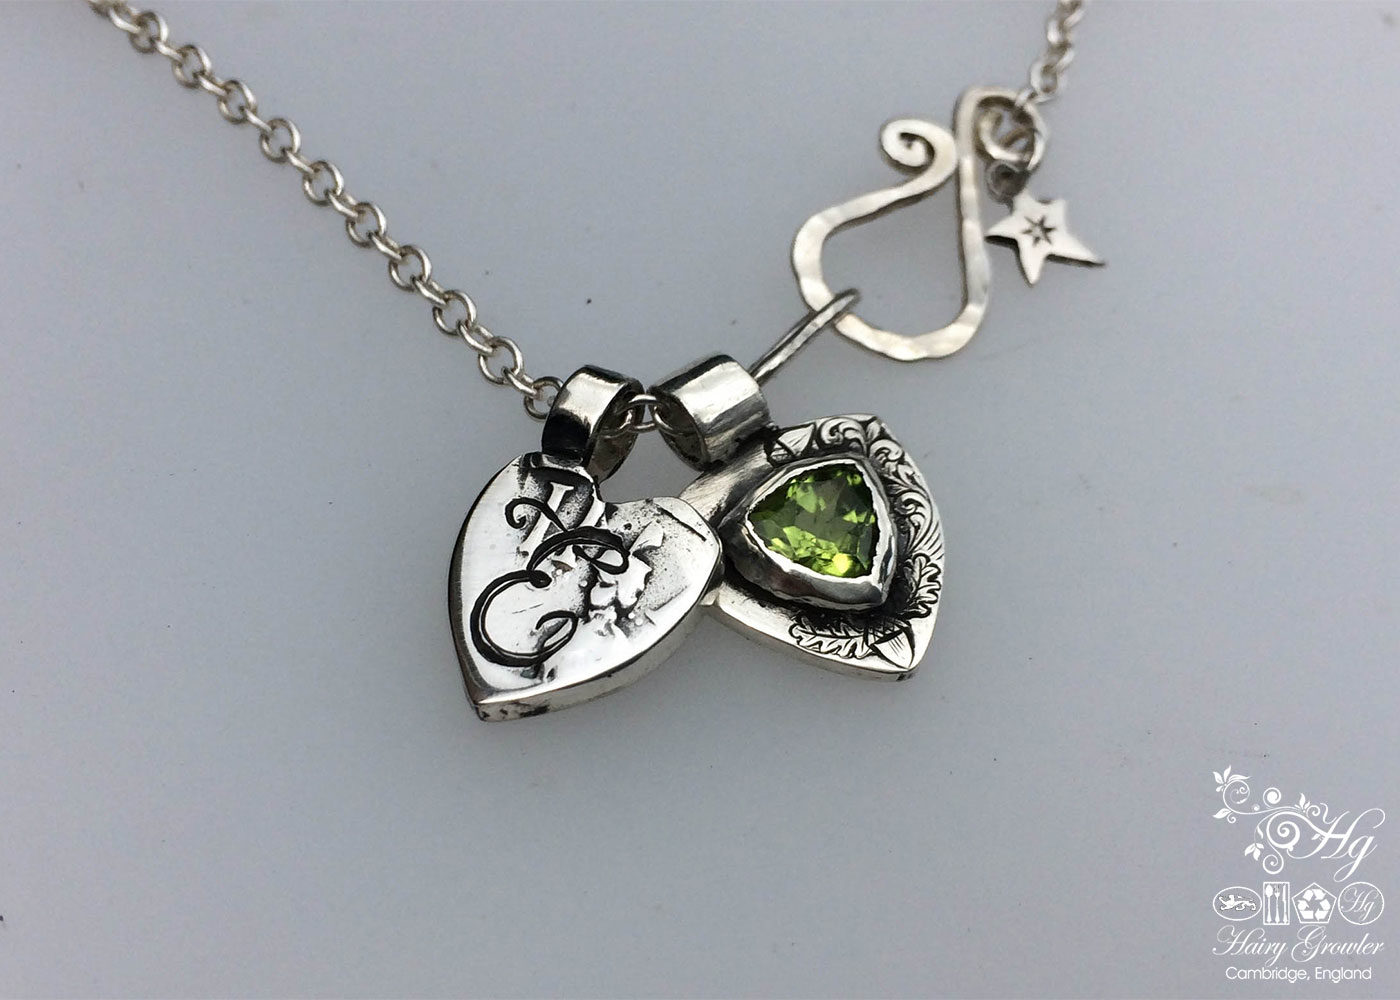 handcrafted silver and peridot family shield for a tree sculpture, necklace or bracelet